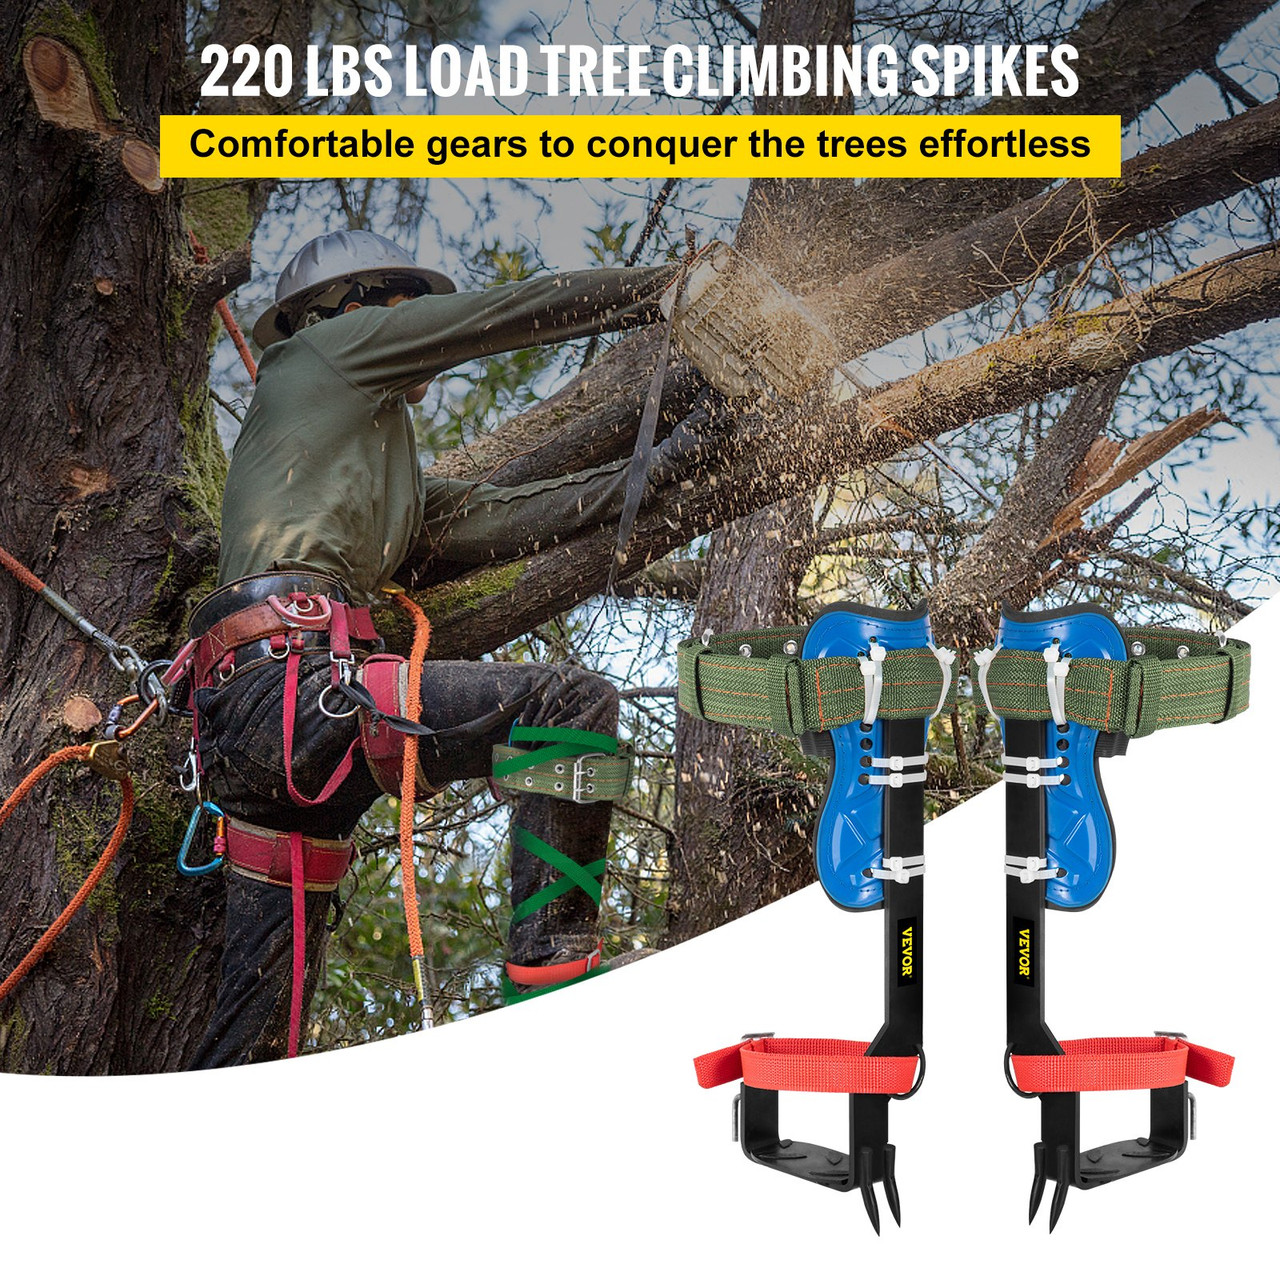 Tree Climbing Spikes, 4 in 1 Alloy Metal Adjustable Pole Climbing Spurs, w/Security Belt & Foot Ankle Straps, Arborist Equipment for Climbers,